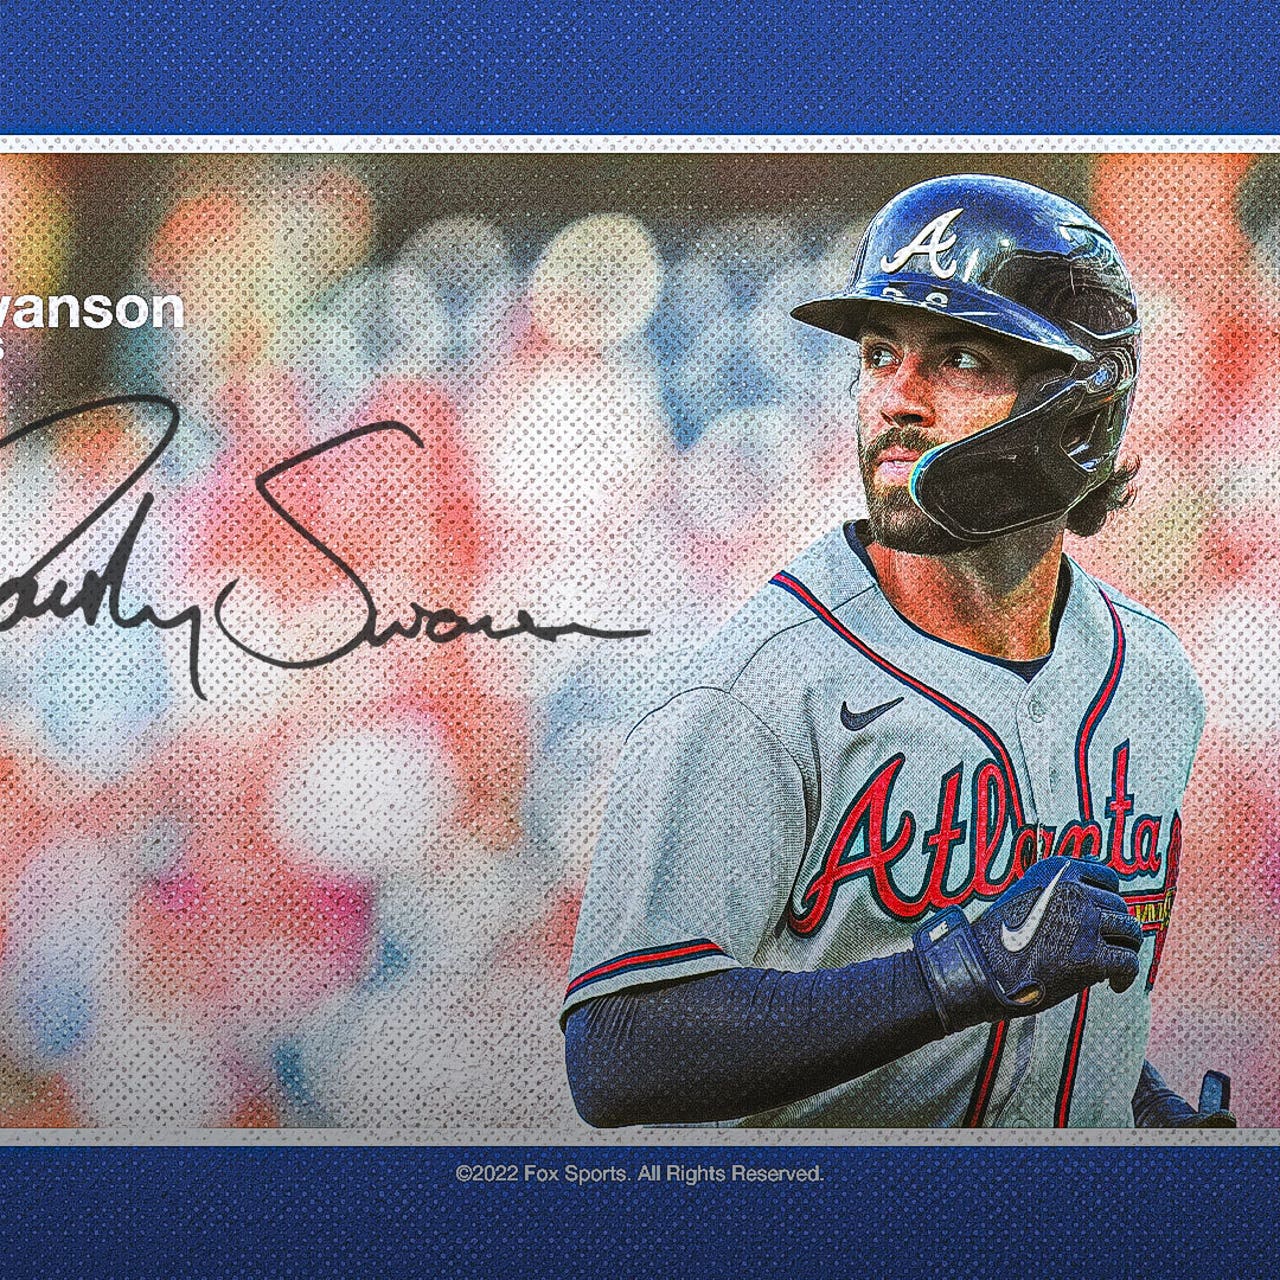 Dansby Swanson was a homegrown star for the Braves. He may get paid  elsewhere